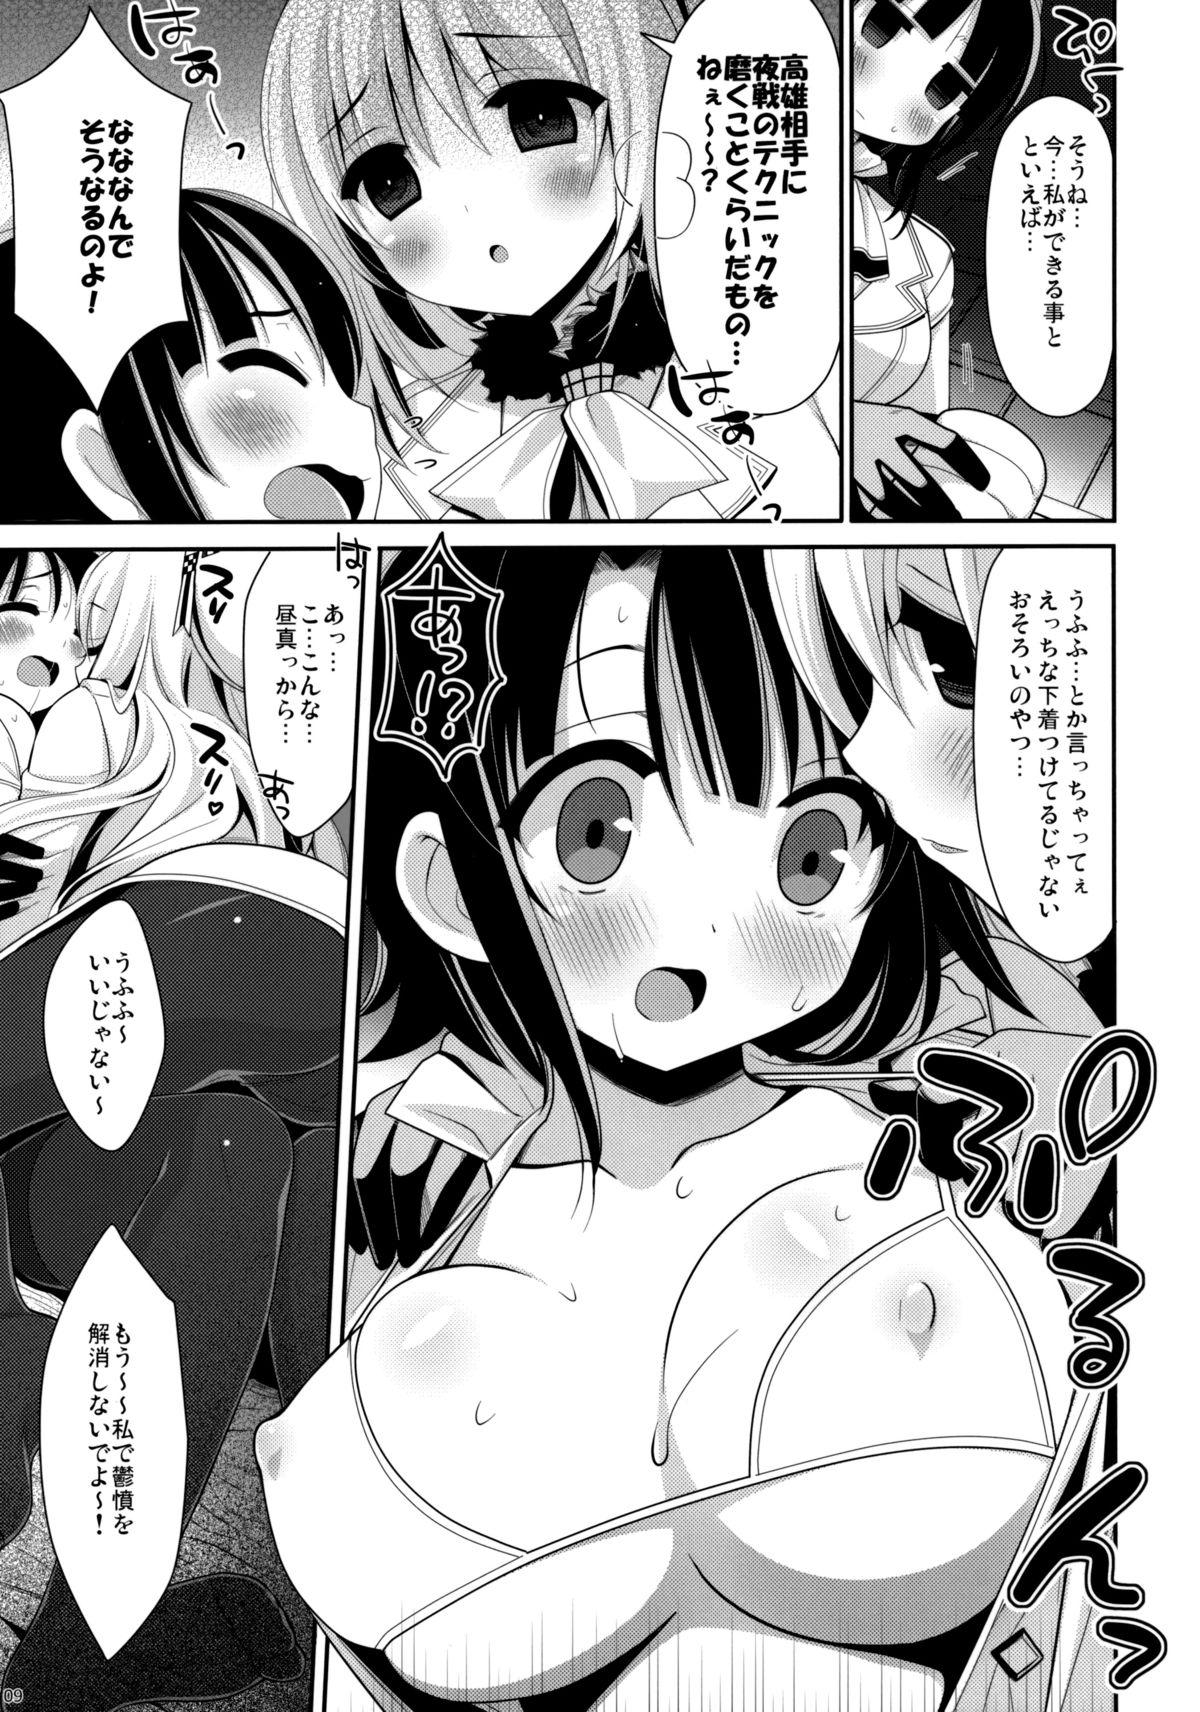 Fucked AT&T - Kantai collection Ex Girlfriends - Page 9